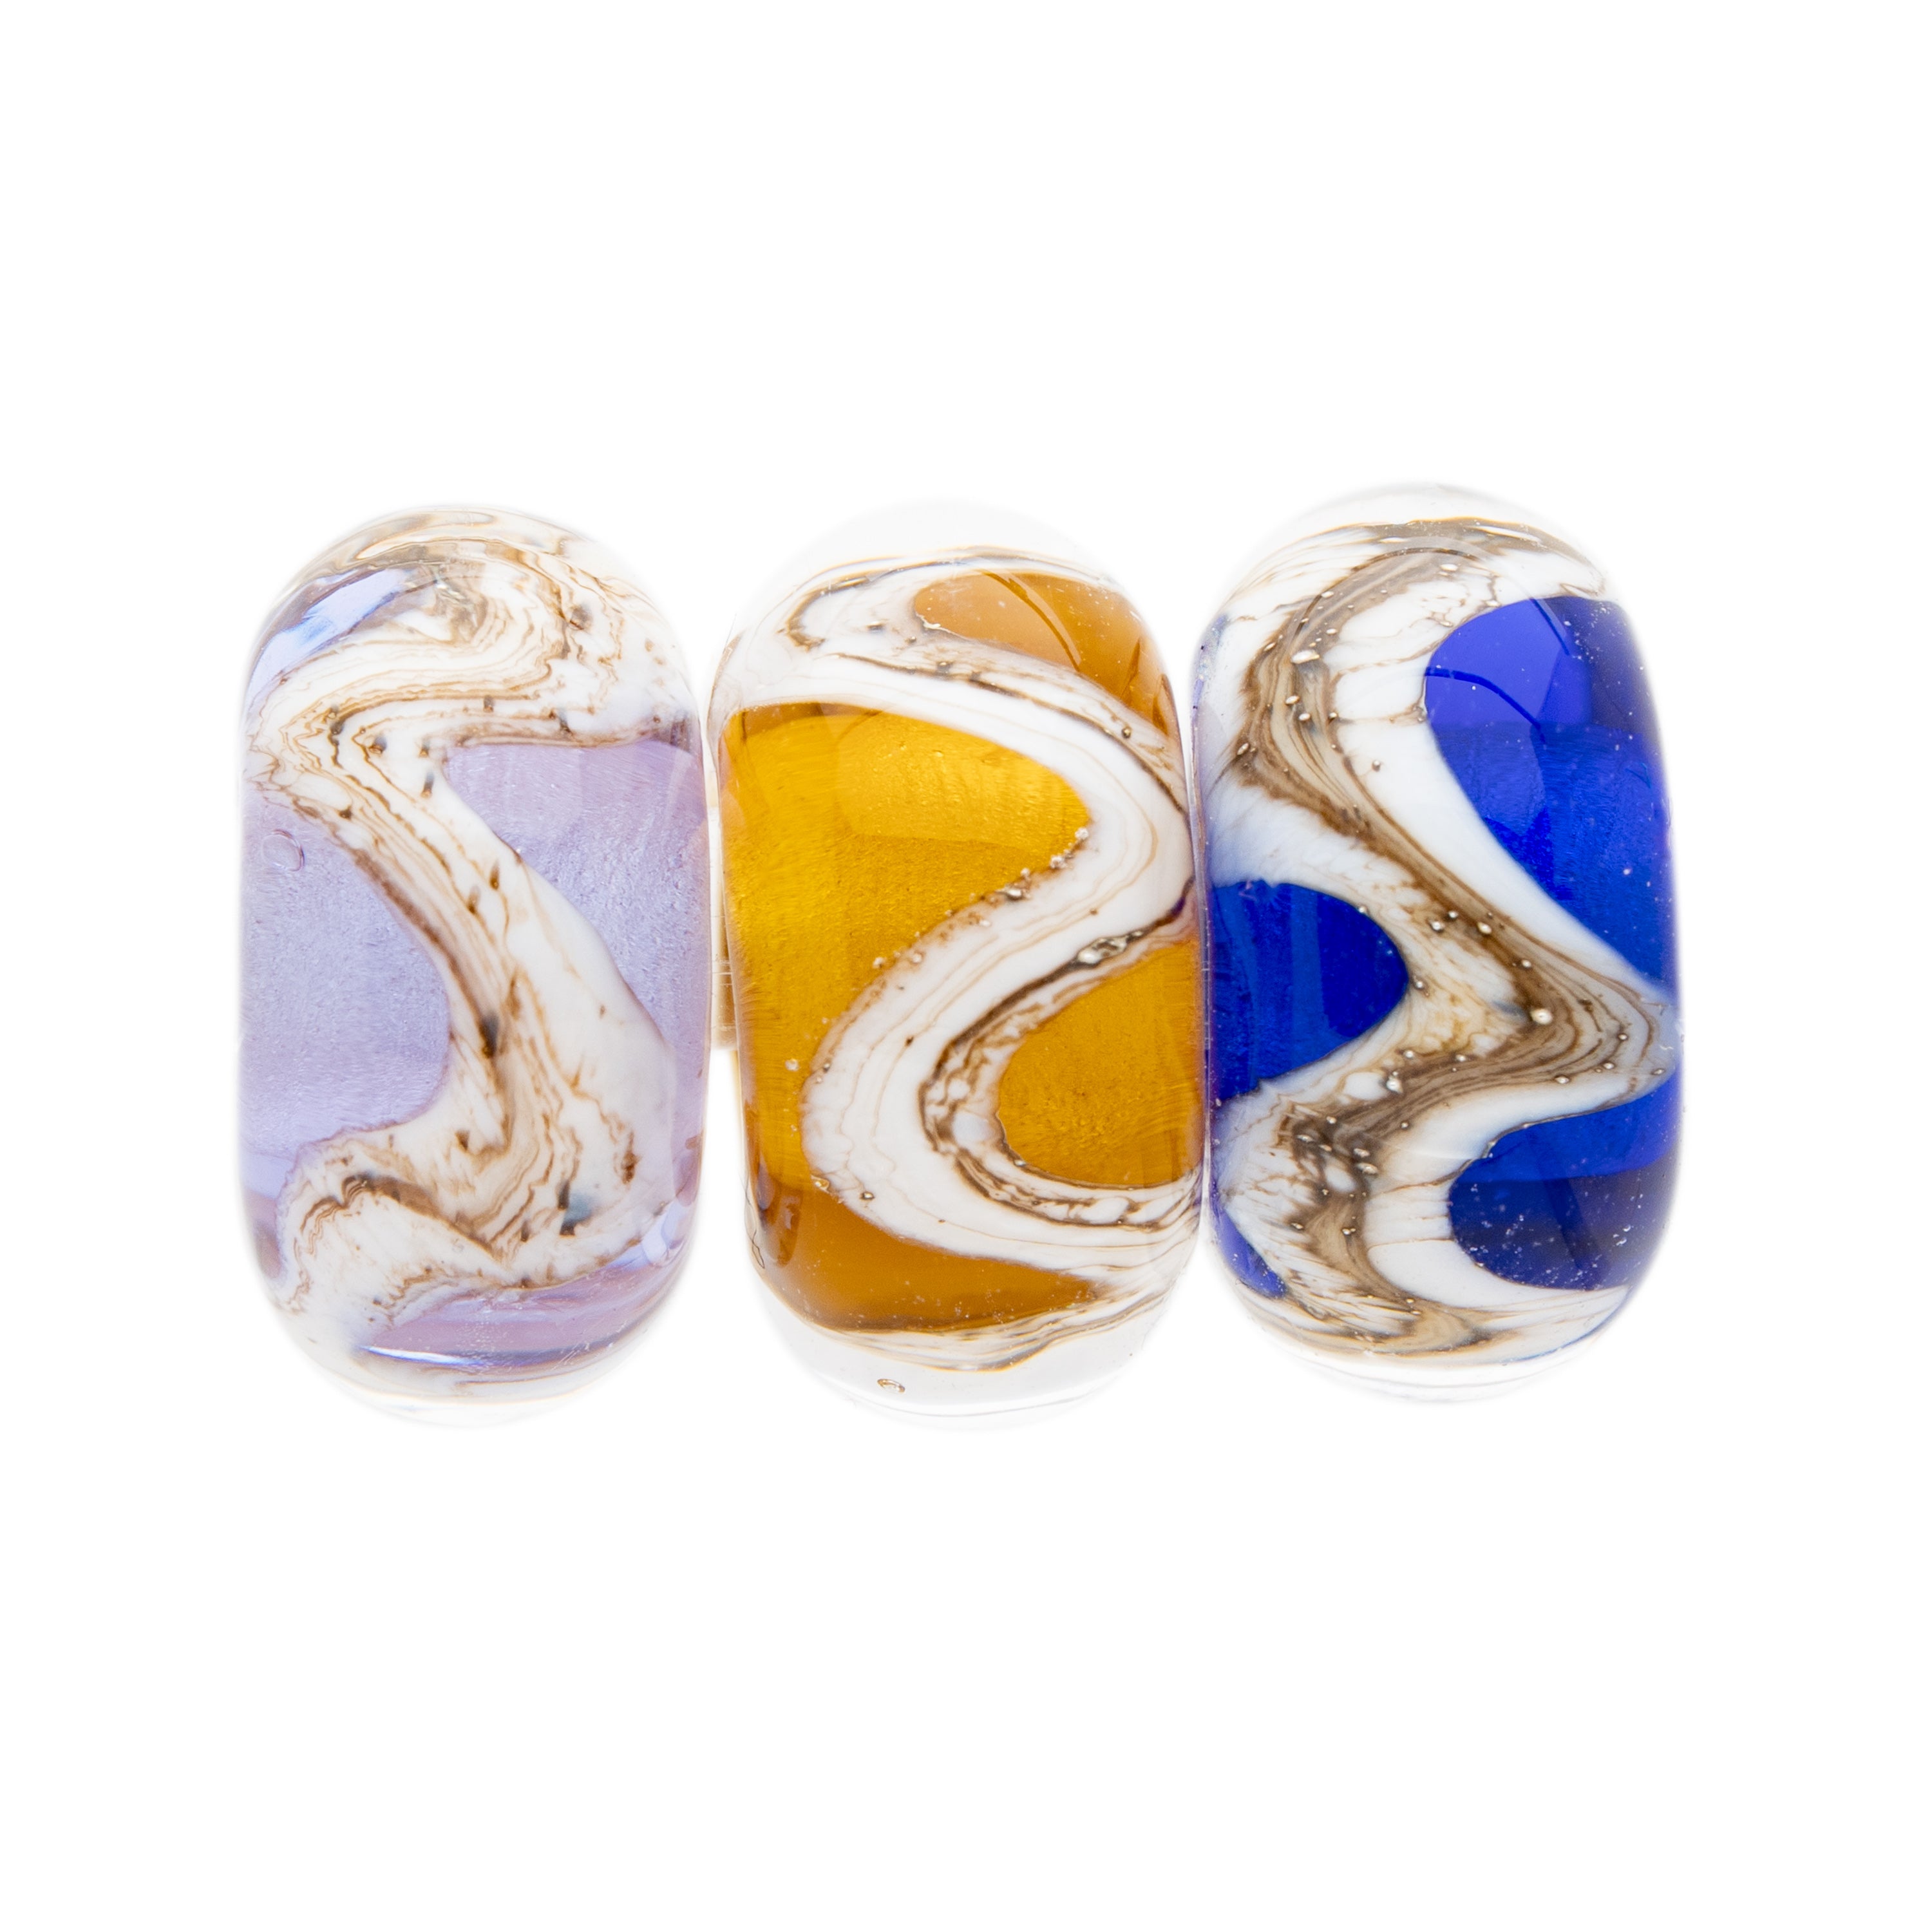 Lavender, amber and dark blue glass beads wrapped with swirling silver sand pattern, representing the Scottish coastline.